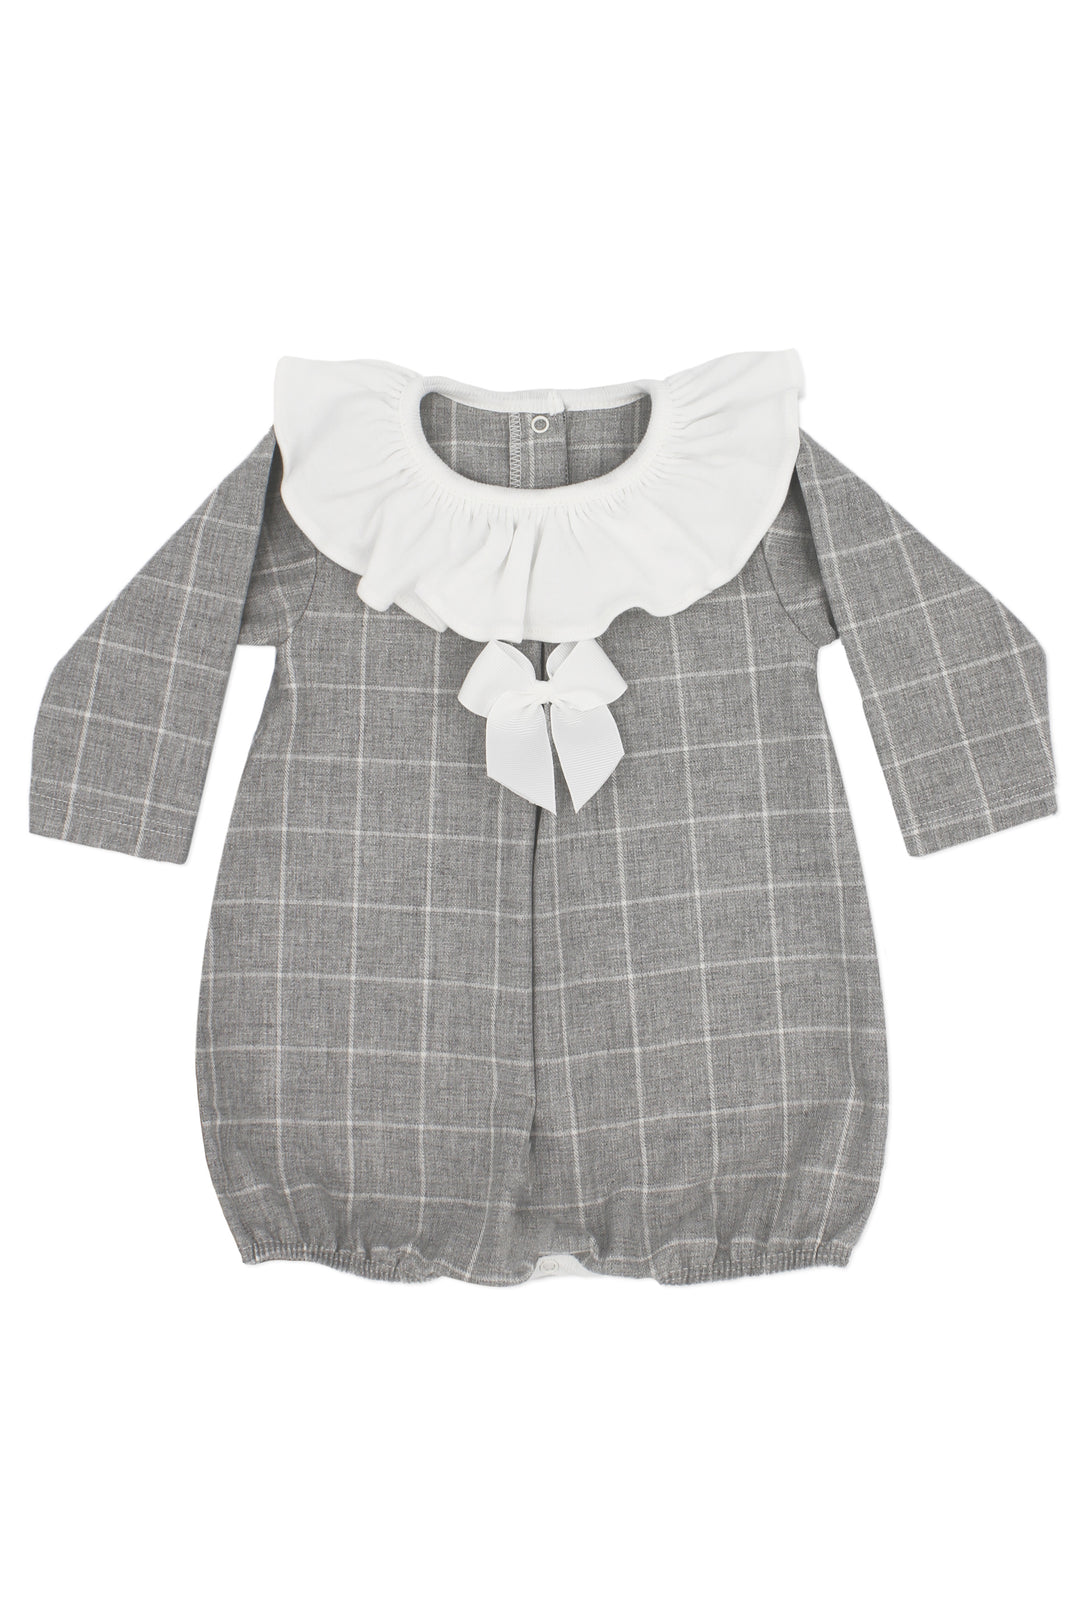 Rapife "Charlotte" Grey Checked Romper | Millie and John